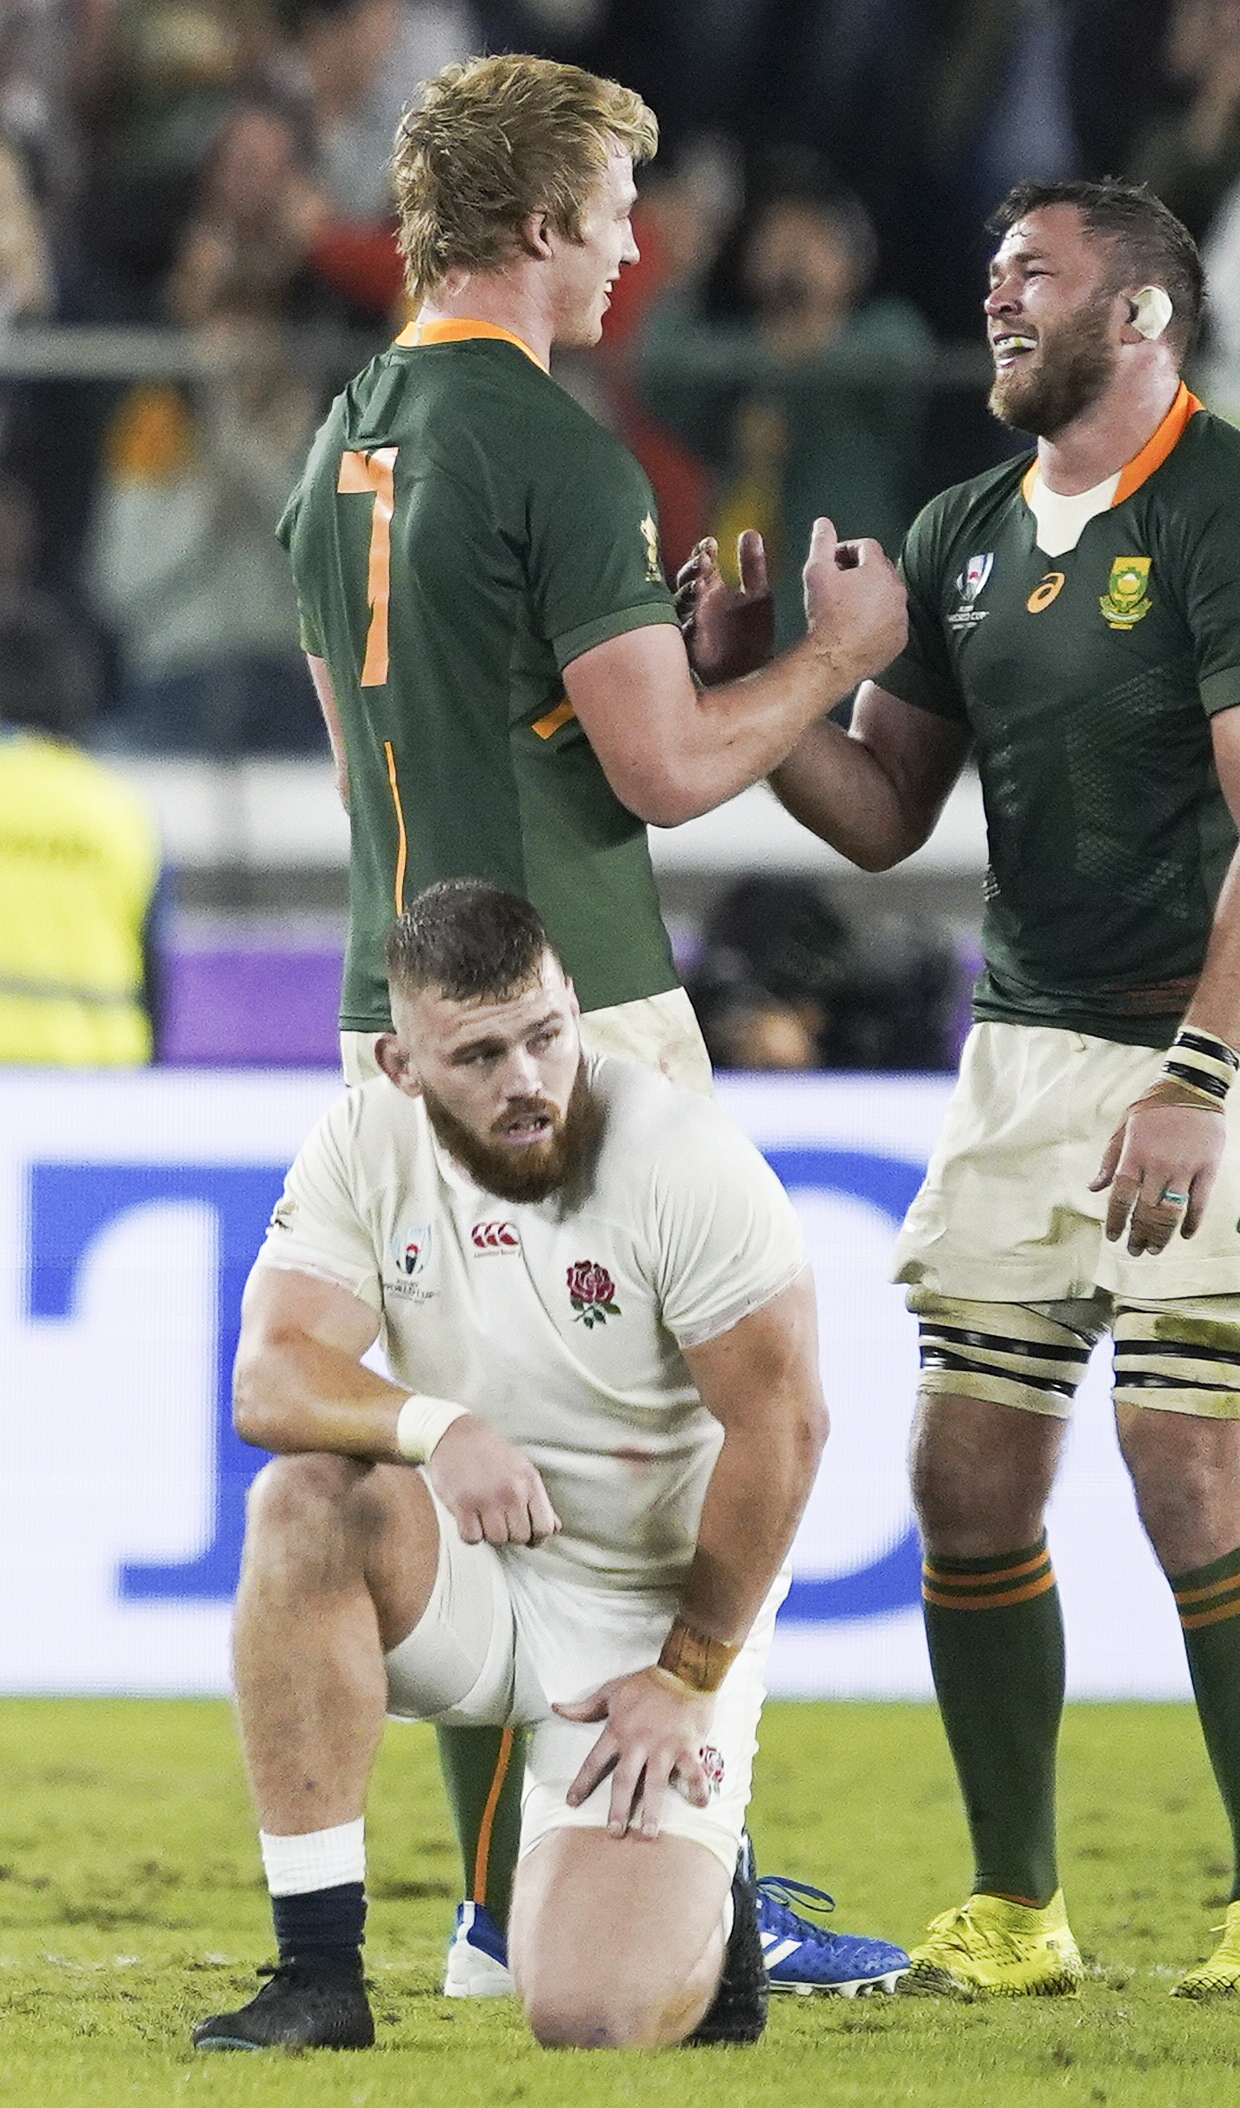 epa07966324 Man of the match Duane Vermeulen (R) and Pieter-Steph du Toit (L) of South Africa react after the Rugby World Cup final match between England and South Africa at the International Stadium Yokohama, Kanagawa Prefecture, Yokohama, Japan, 02 November 2019. EPA/FRANCK ROBICHON EDITORIAL USE ONLY/ NO COMMERCIAL SALES / NOT USED IN ASSOCATION WITH ANY COMMERCIAL ENTITY